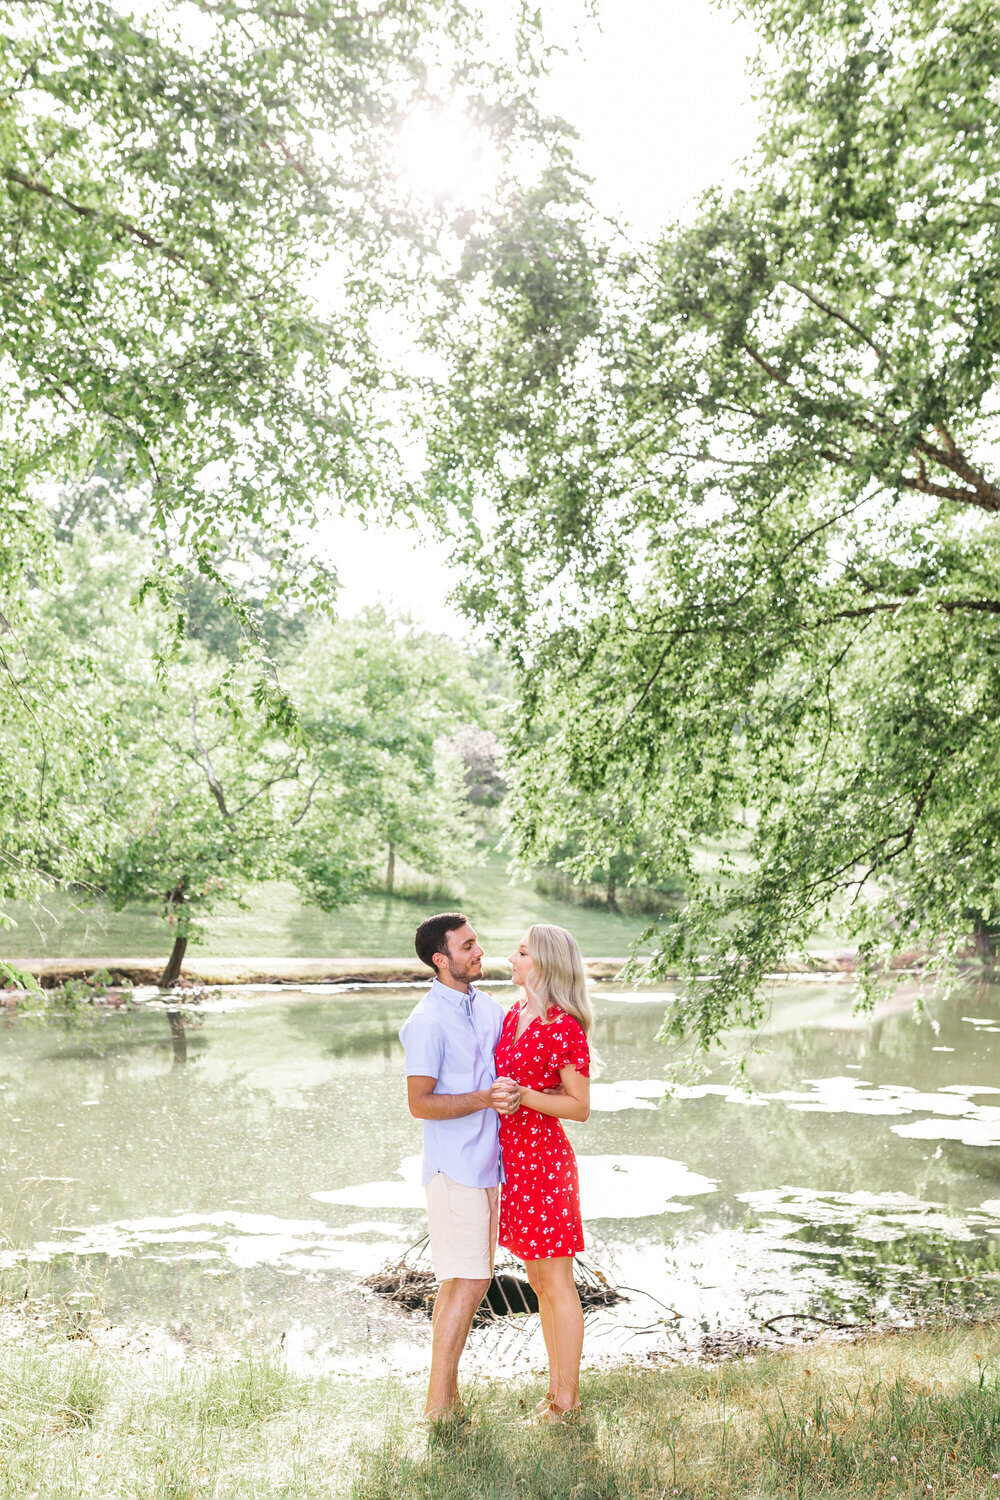 Lady in red dress stands holding hands with fiance by a lake